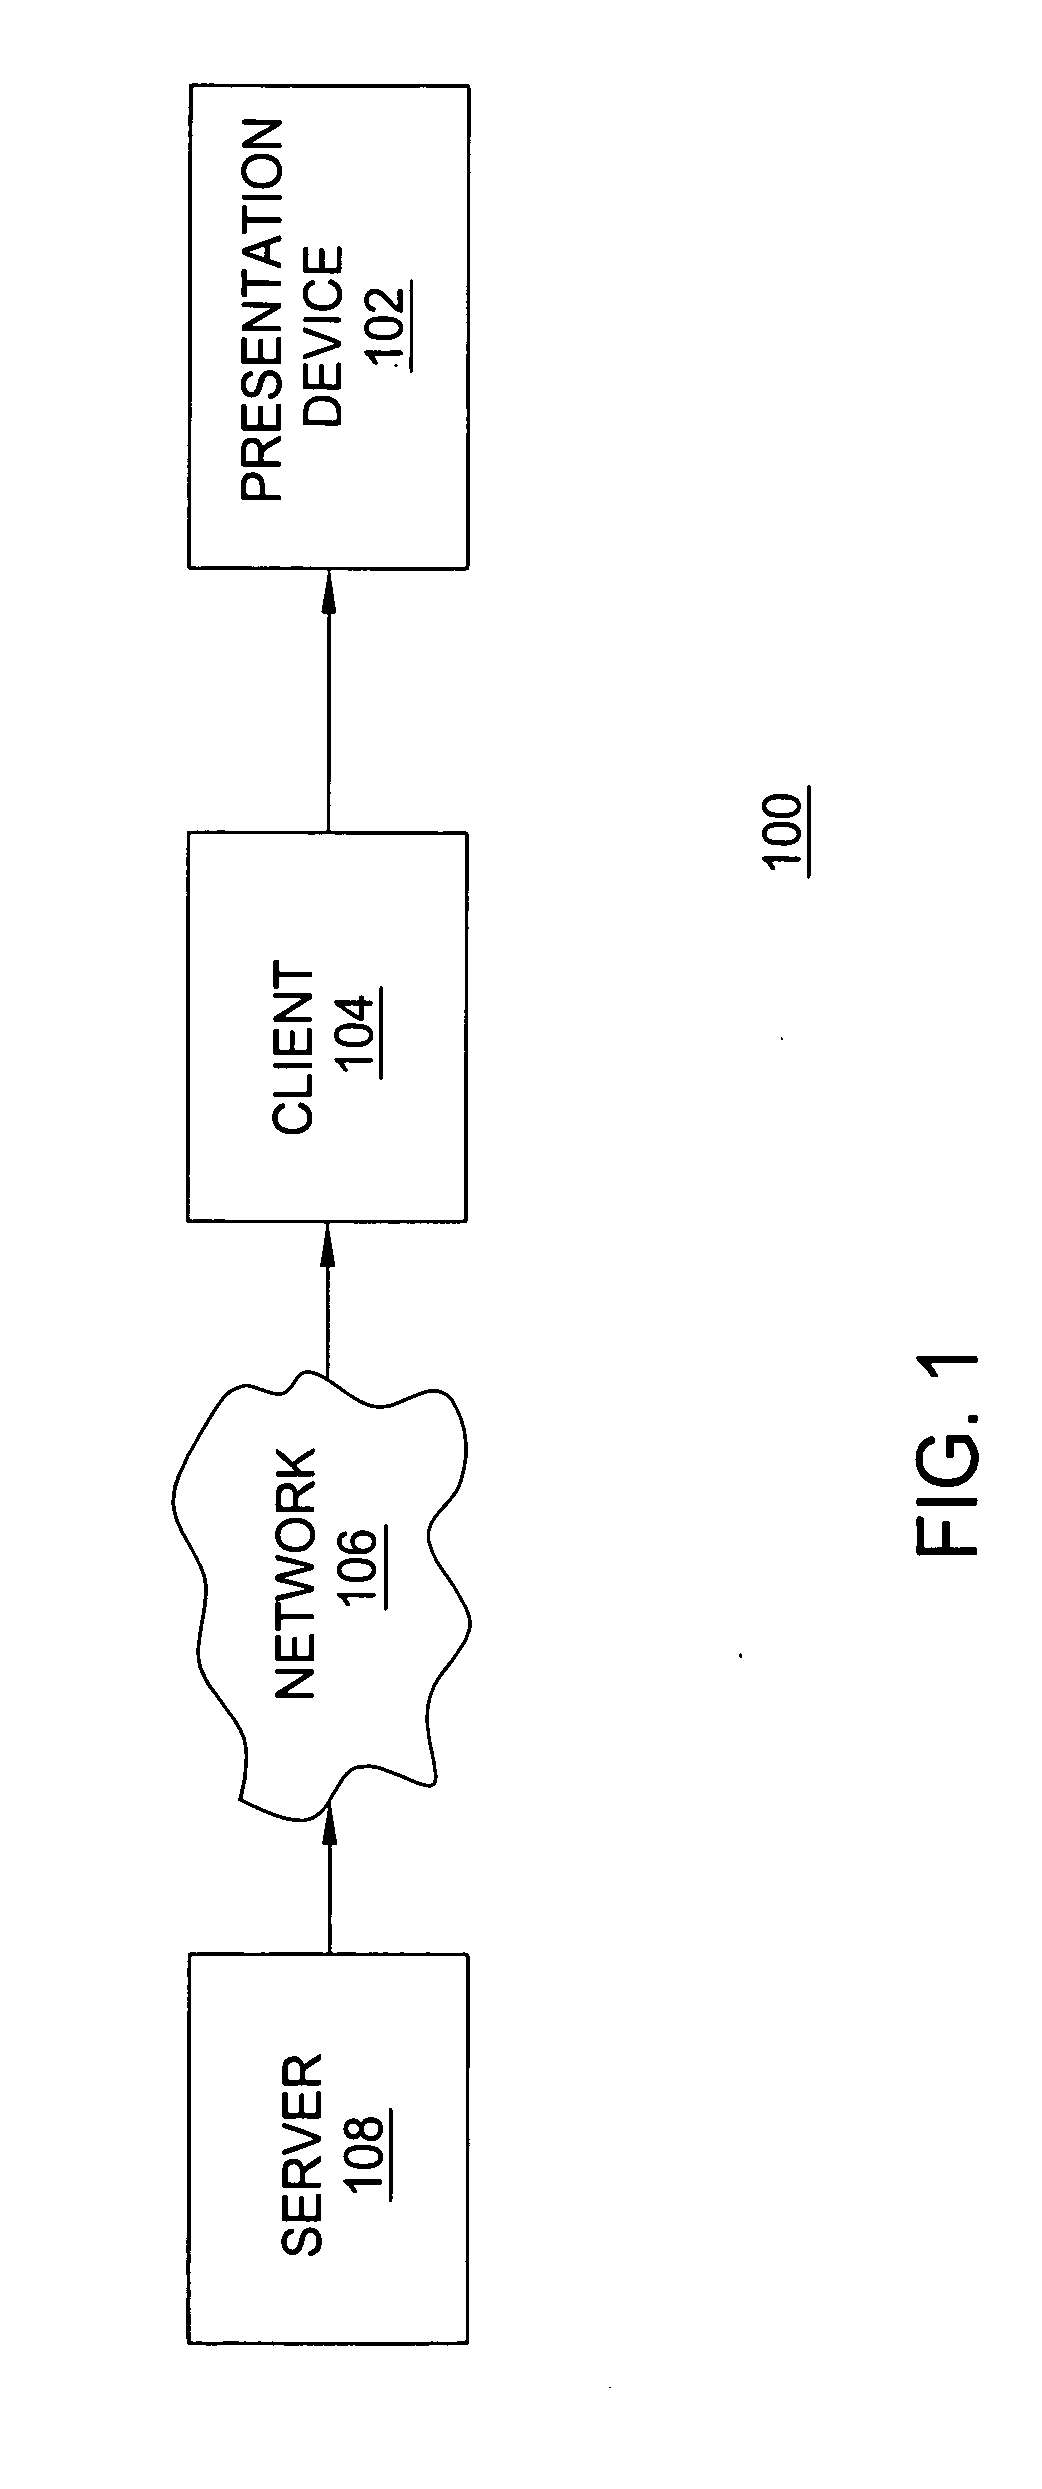 Method of transforming java bytecode into a directly interpretable compressed format